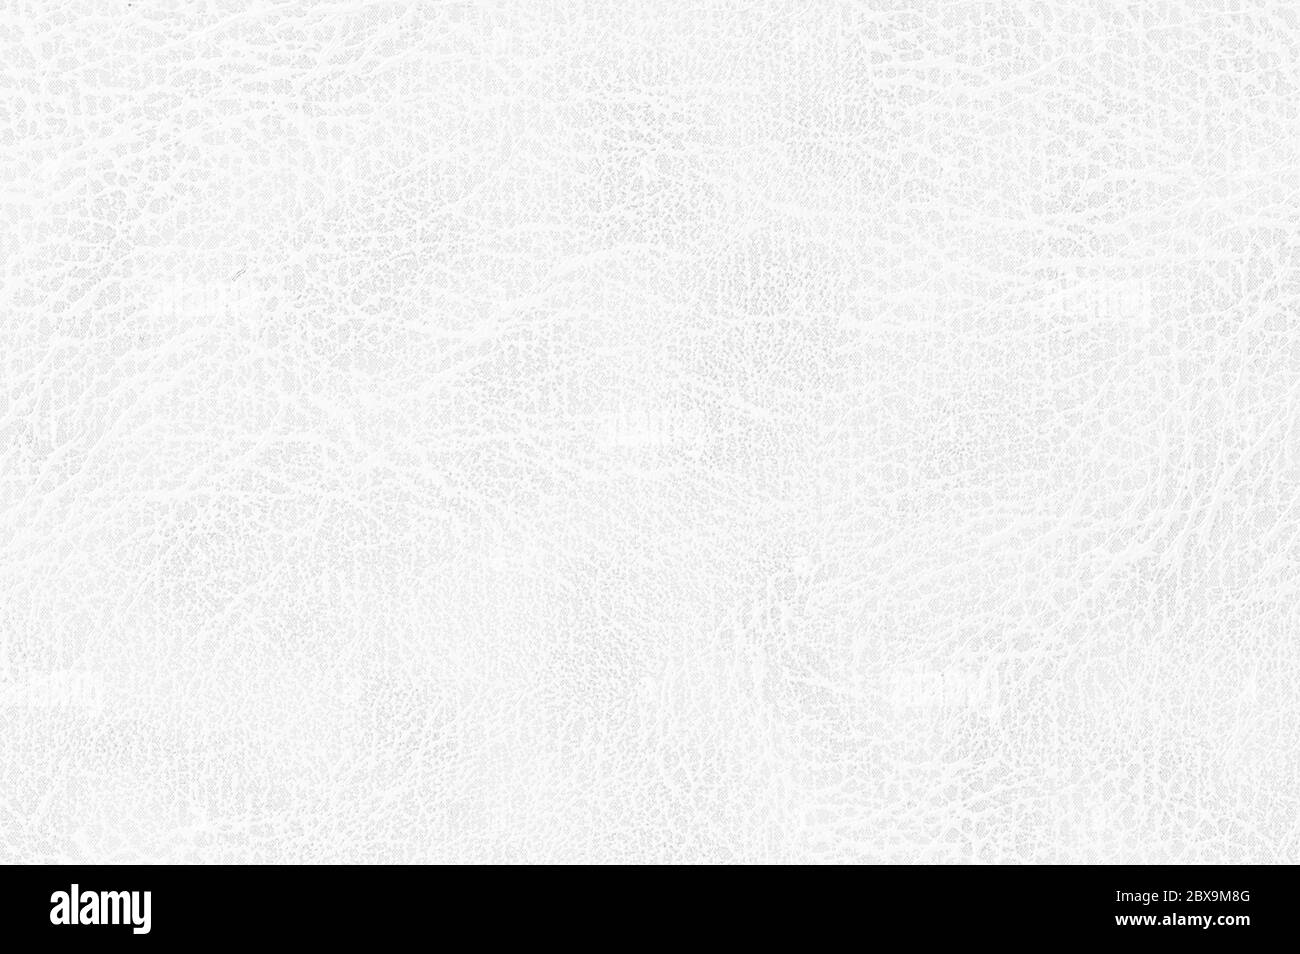 White Leather Texture used as luxury classic Background ,leather textures  are perfect for your creative paper backdrop Stock Photo - Alamy